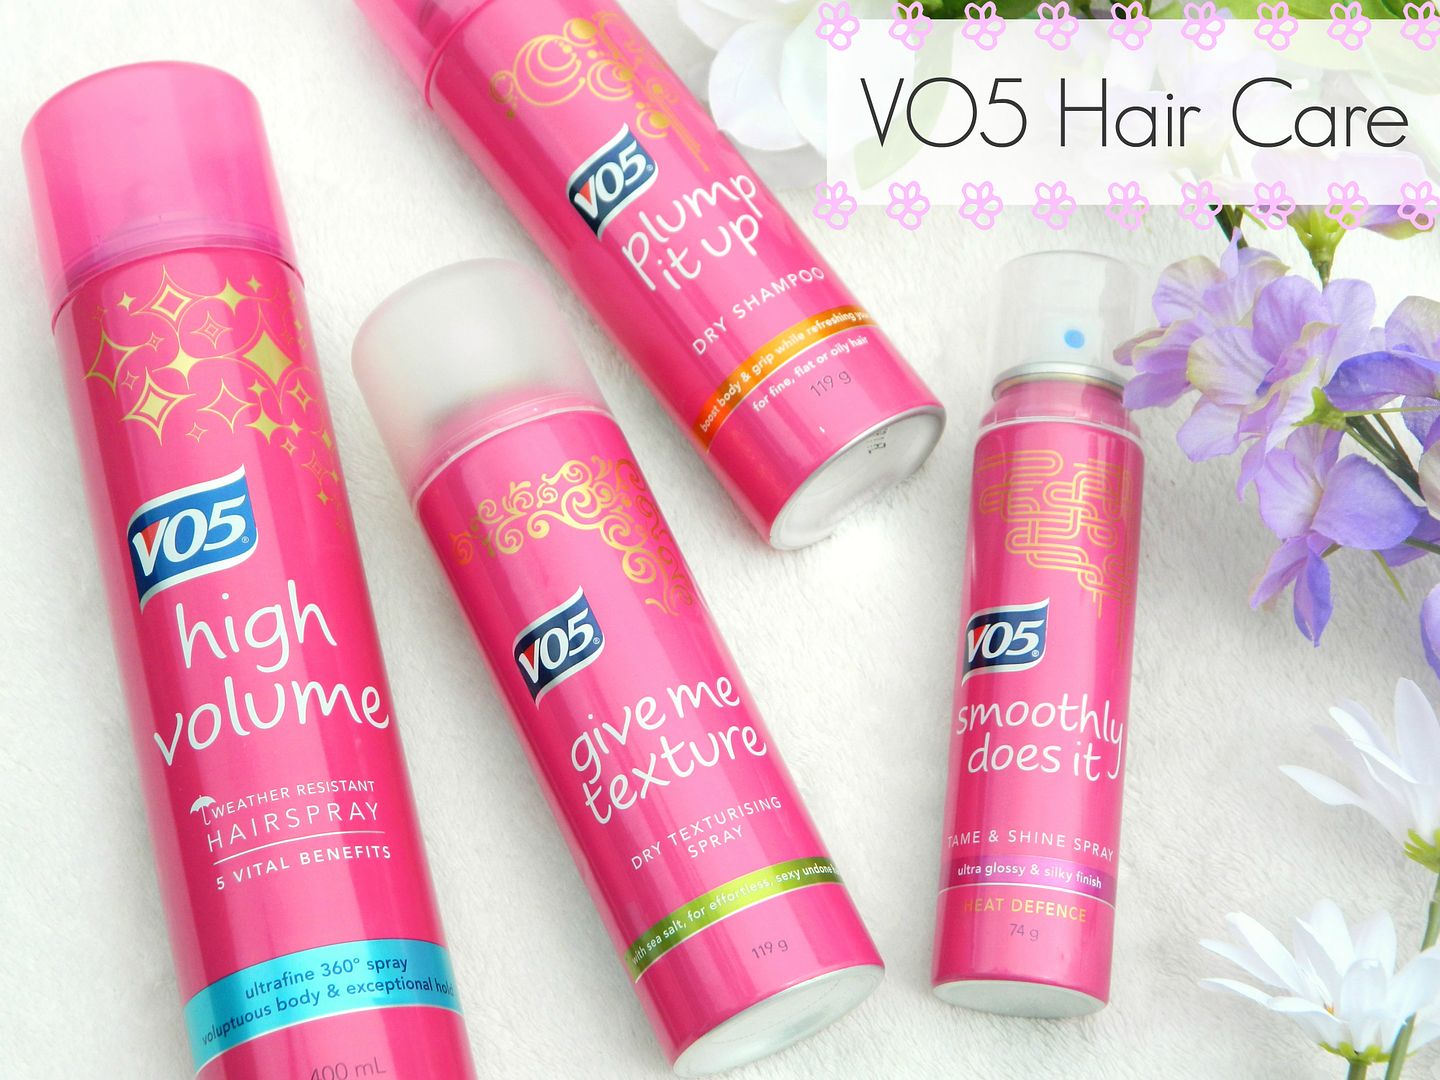 VO5 Hair Care Review Belle-amie UK Beauty Fashion Lifestyle Blog